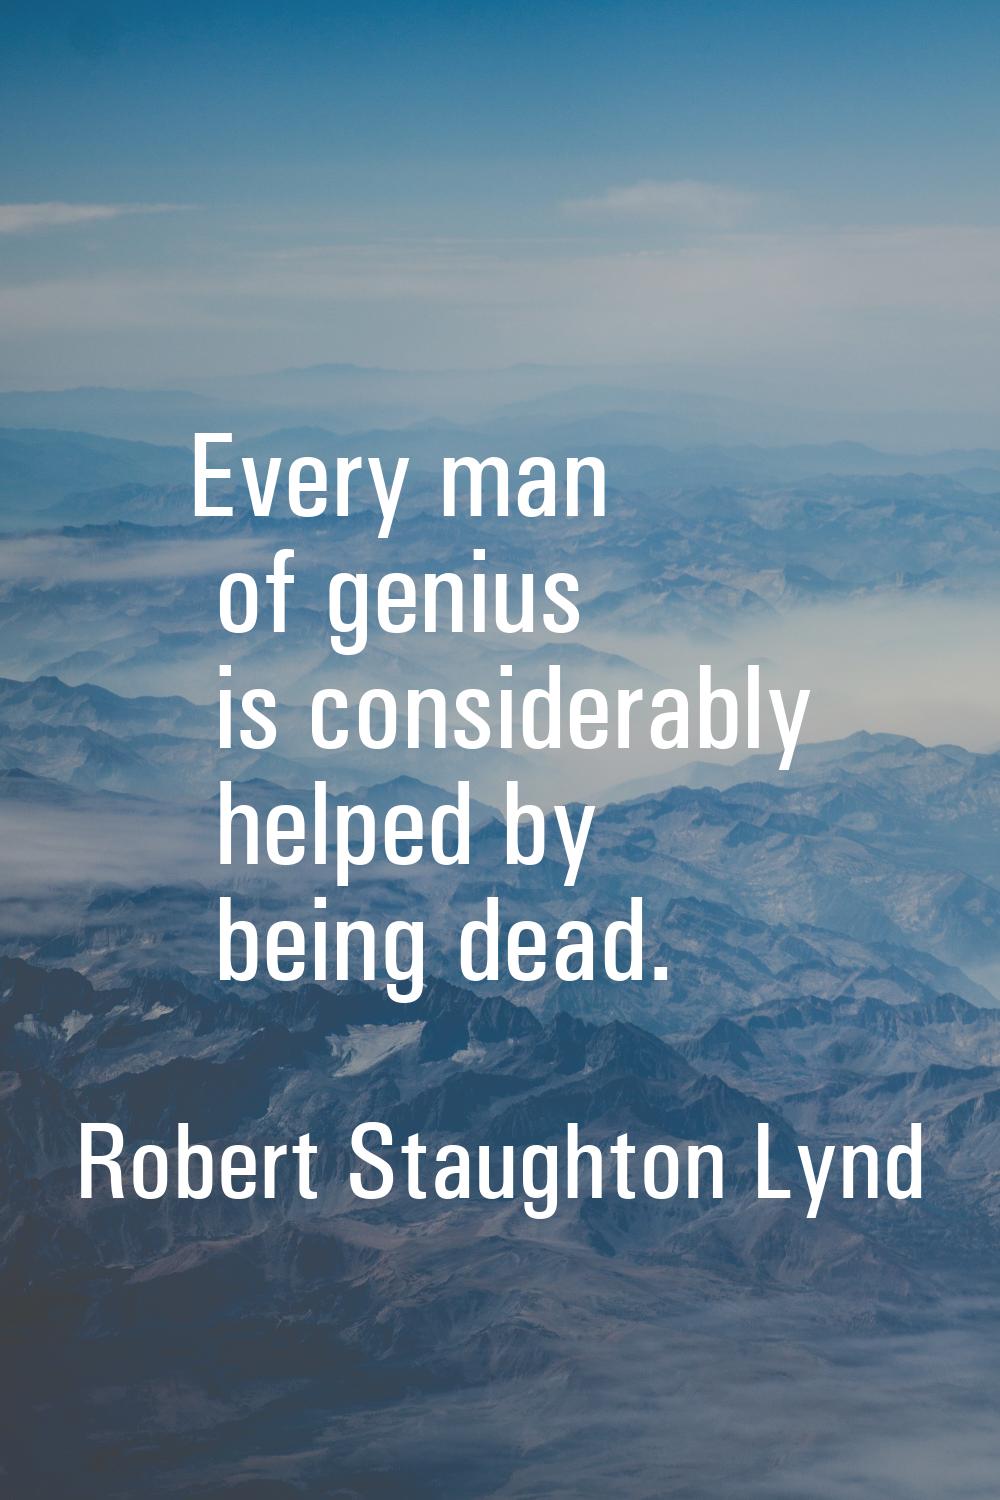 Every man of genius is considerably helped by being dead.